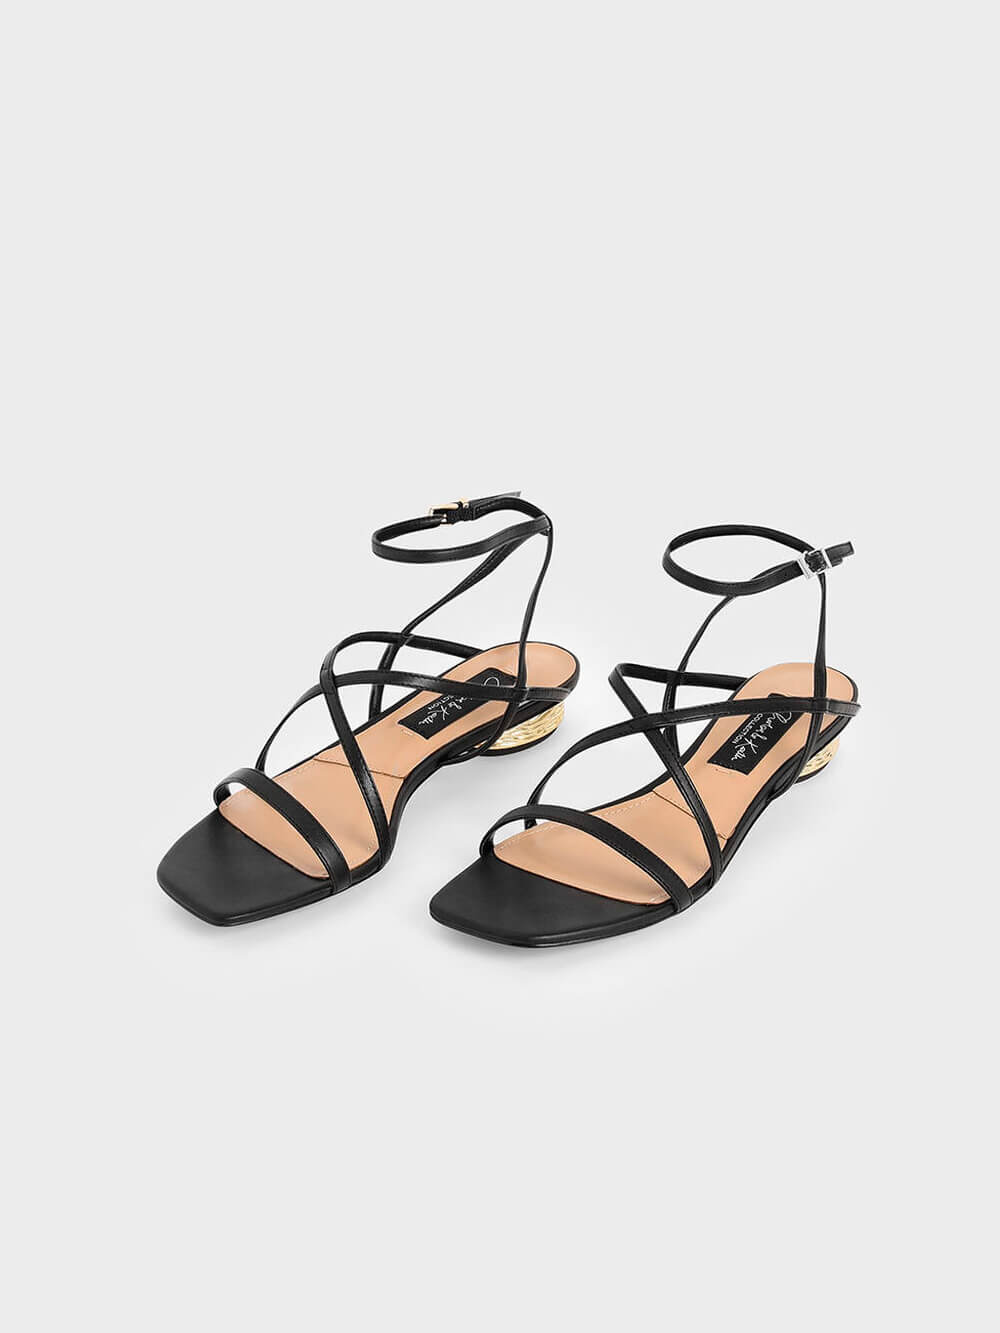 CHARLES & KEITH UK | Shop Women's Shoes, Bags & Accessories Online